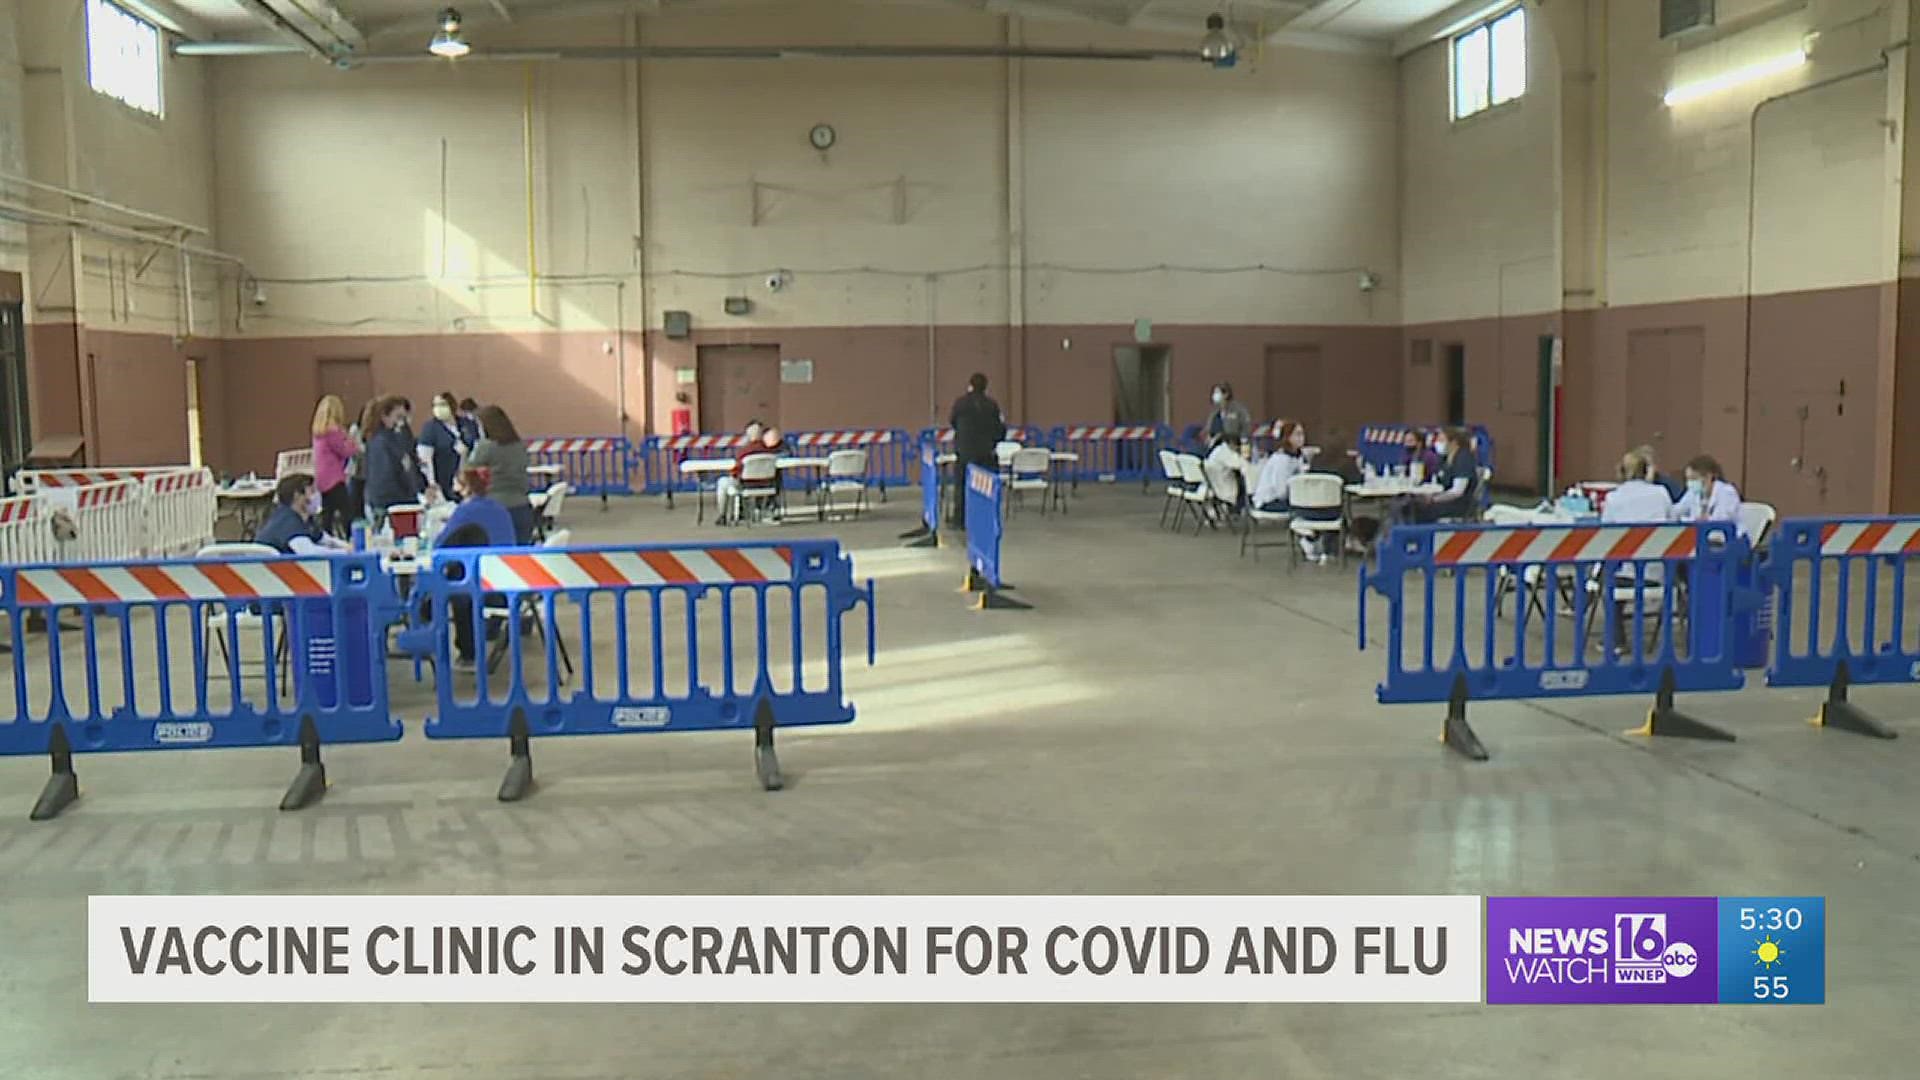 The push to get people vaccinated continued Thursday for folks who need COVID-19 vaccines or flu shots.